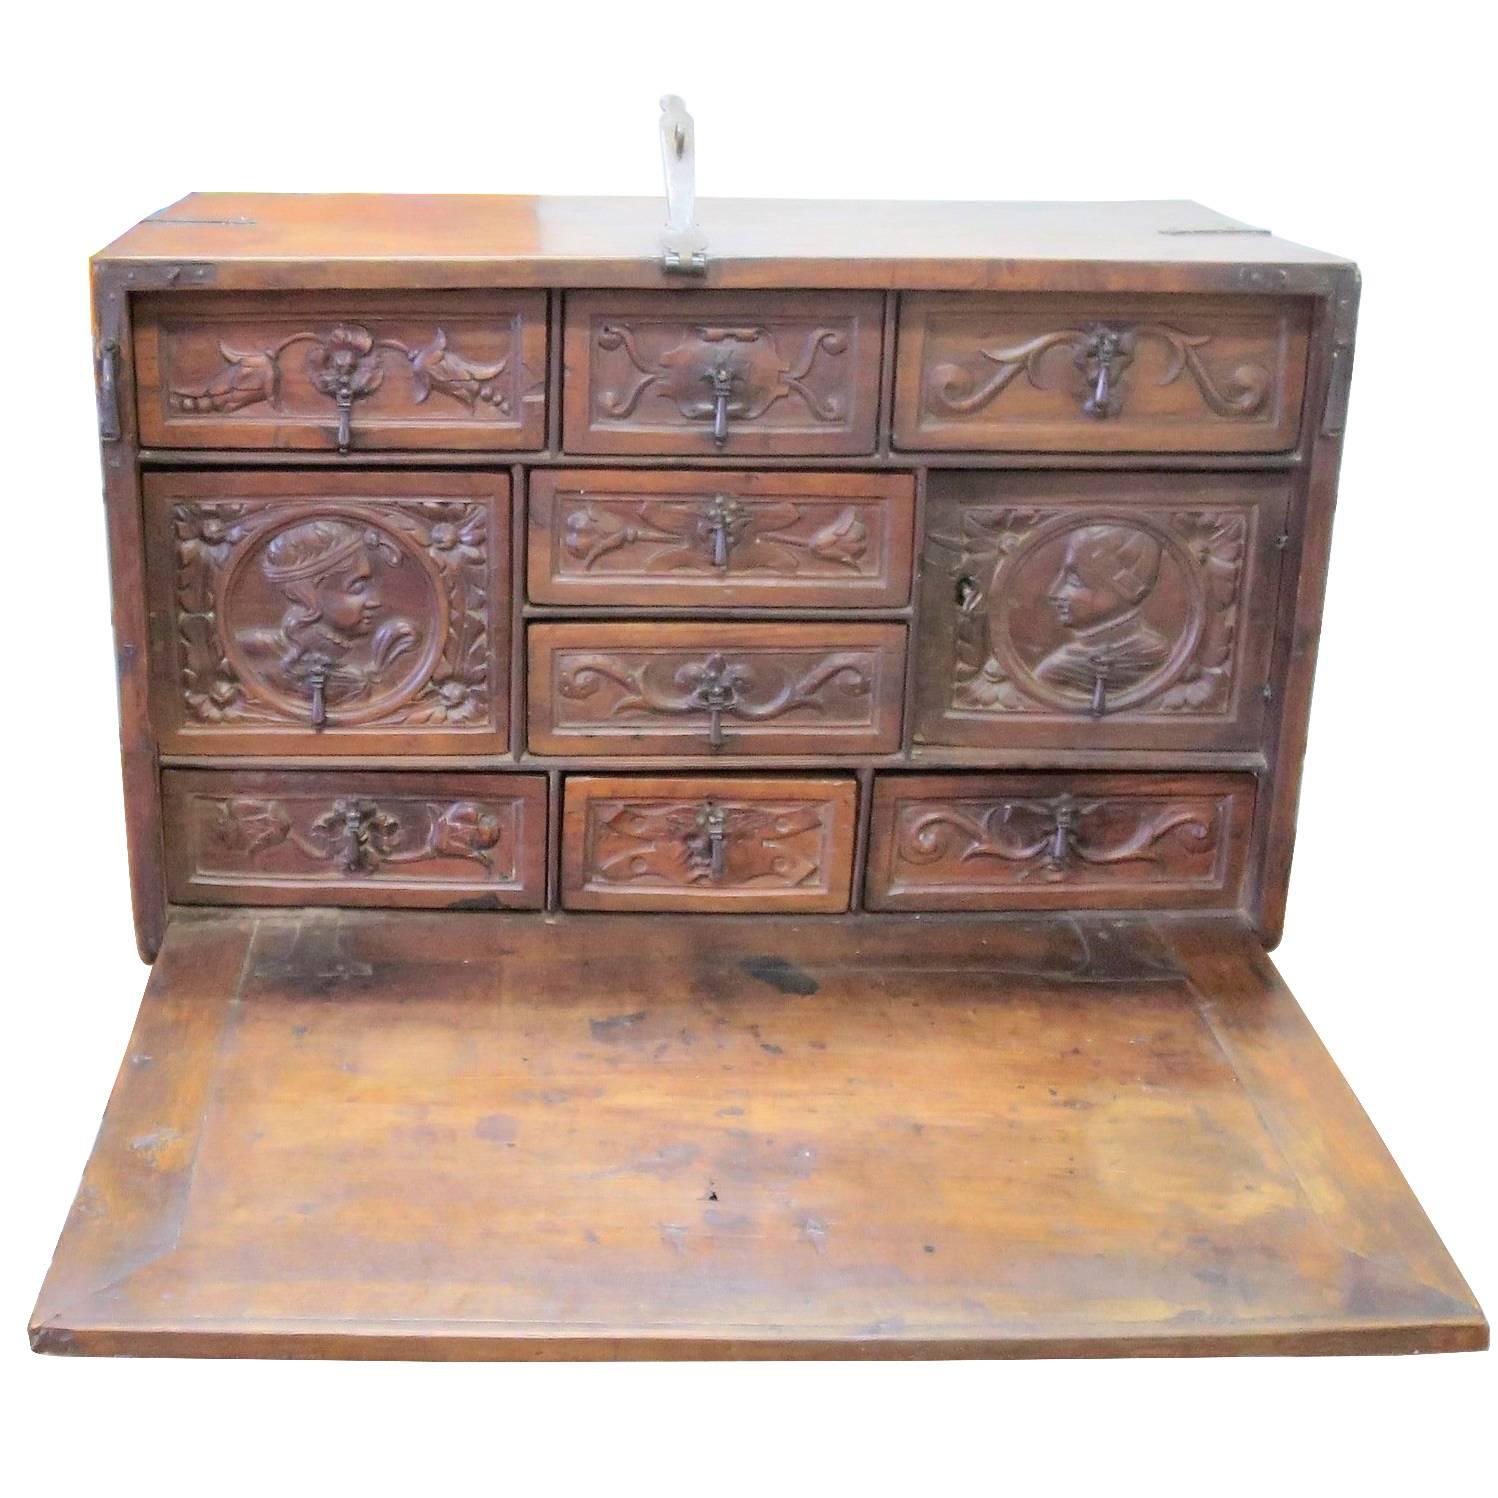 Bargueño End of 16th Century Portugal   "Writting desk" with Drawers, Bargueno